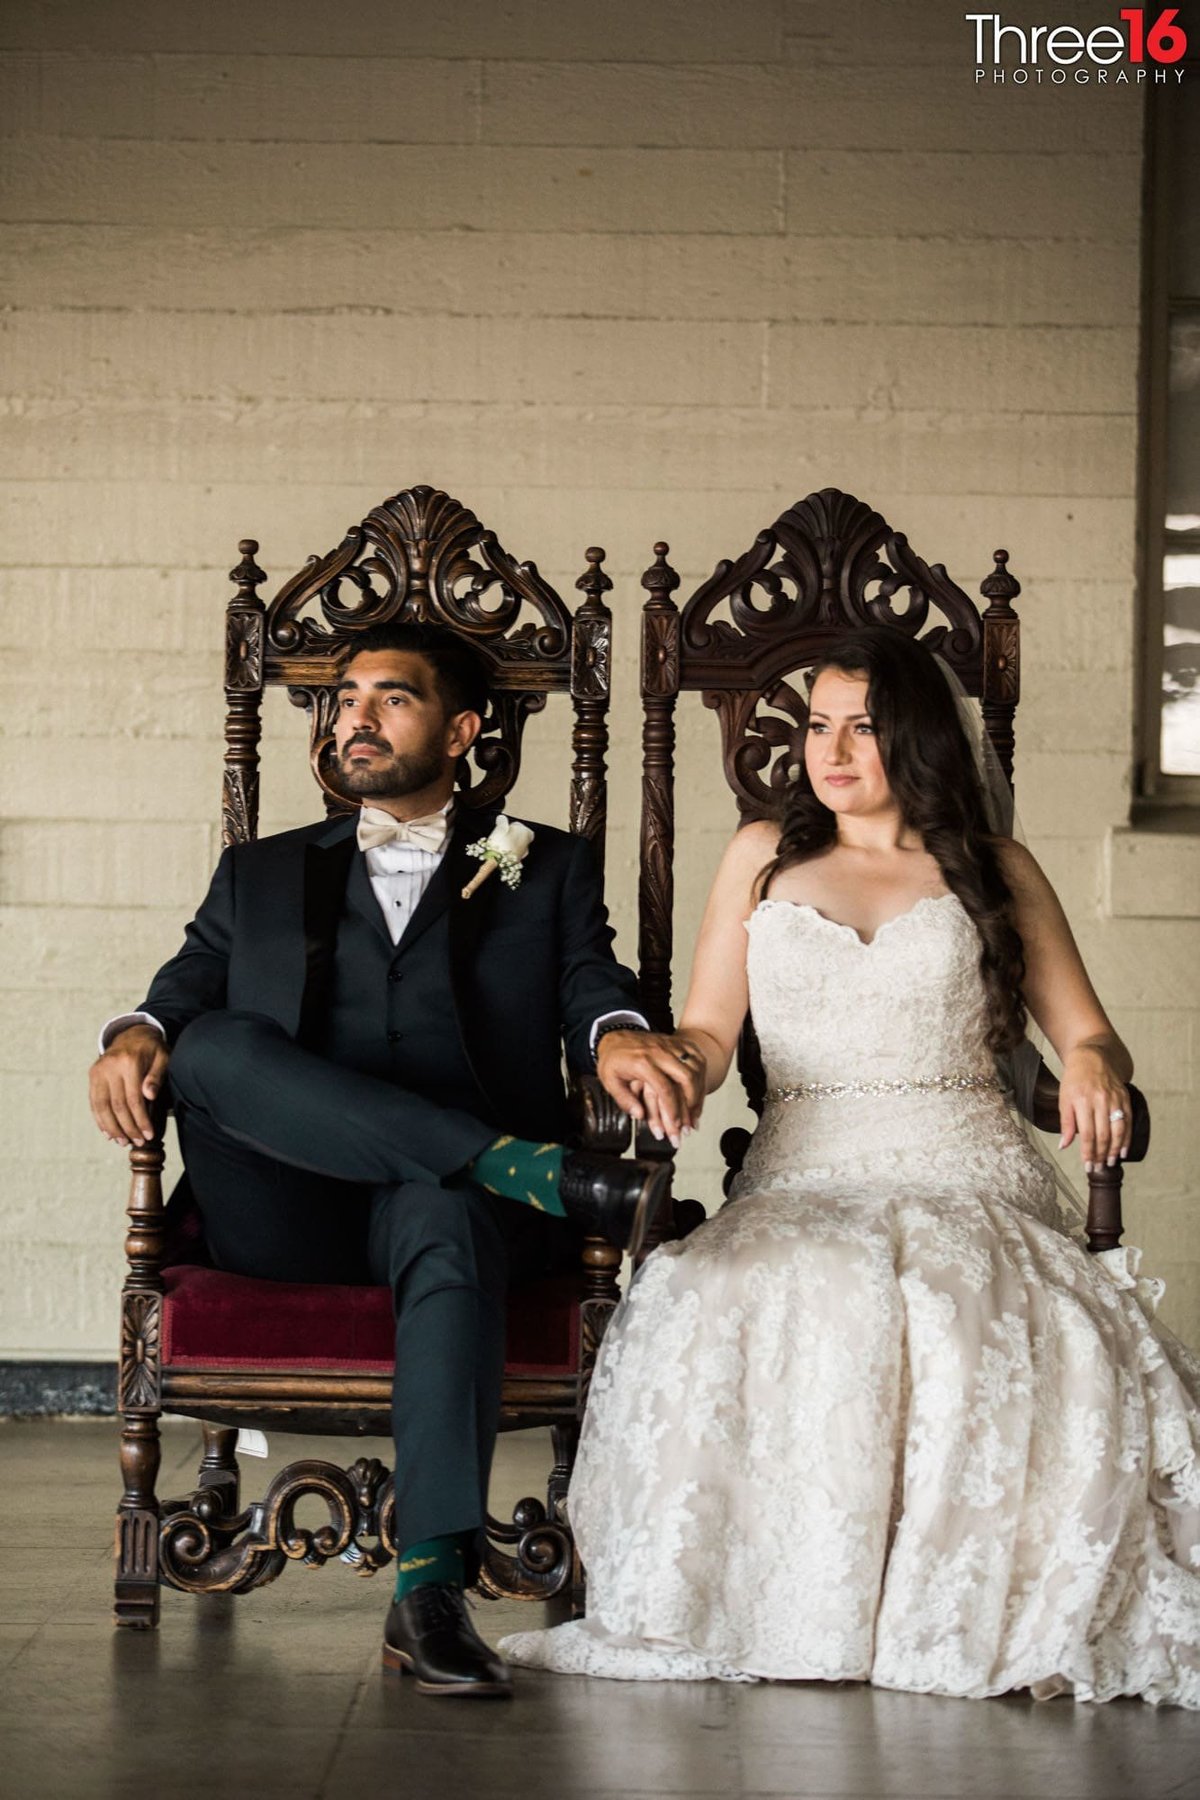 Bride and Groom sit in formal chairs